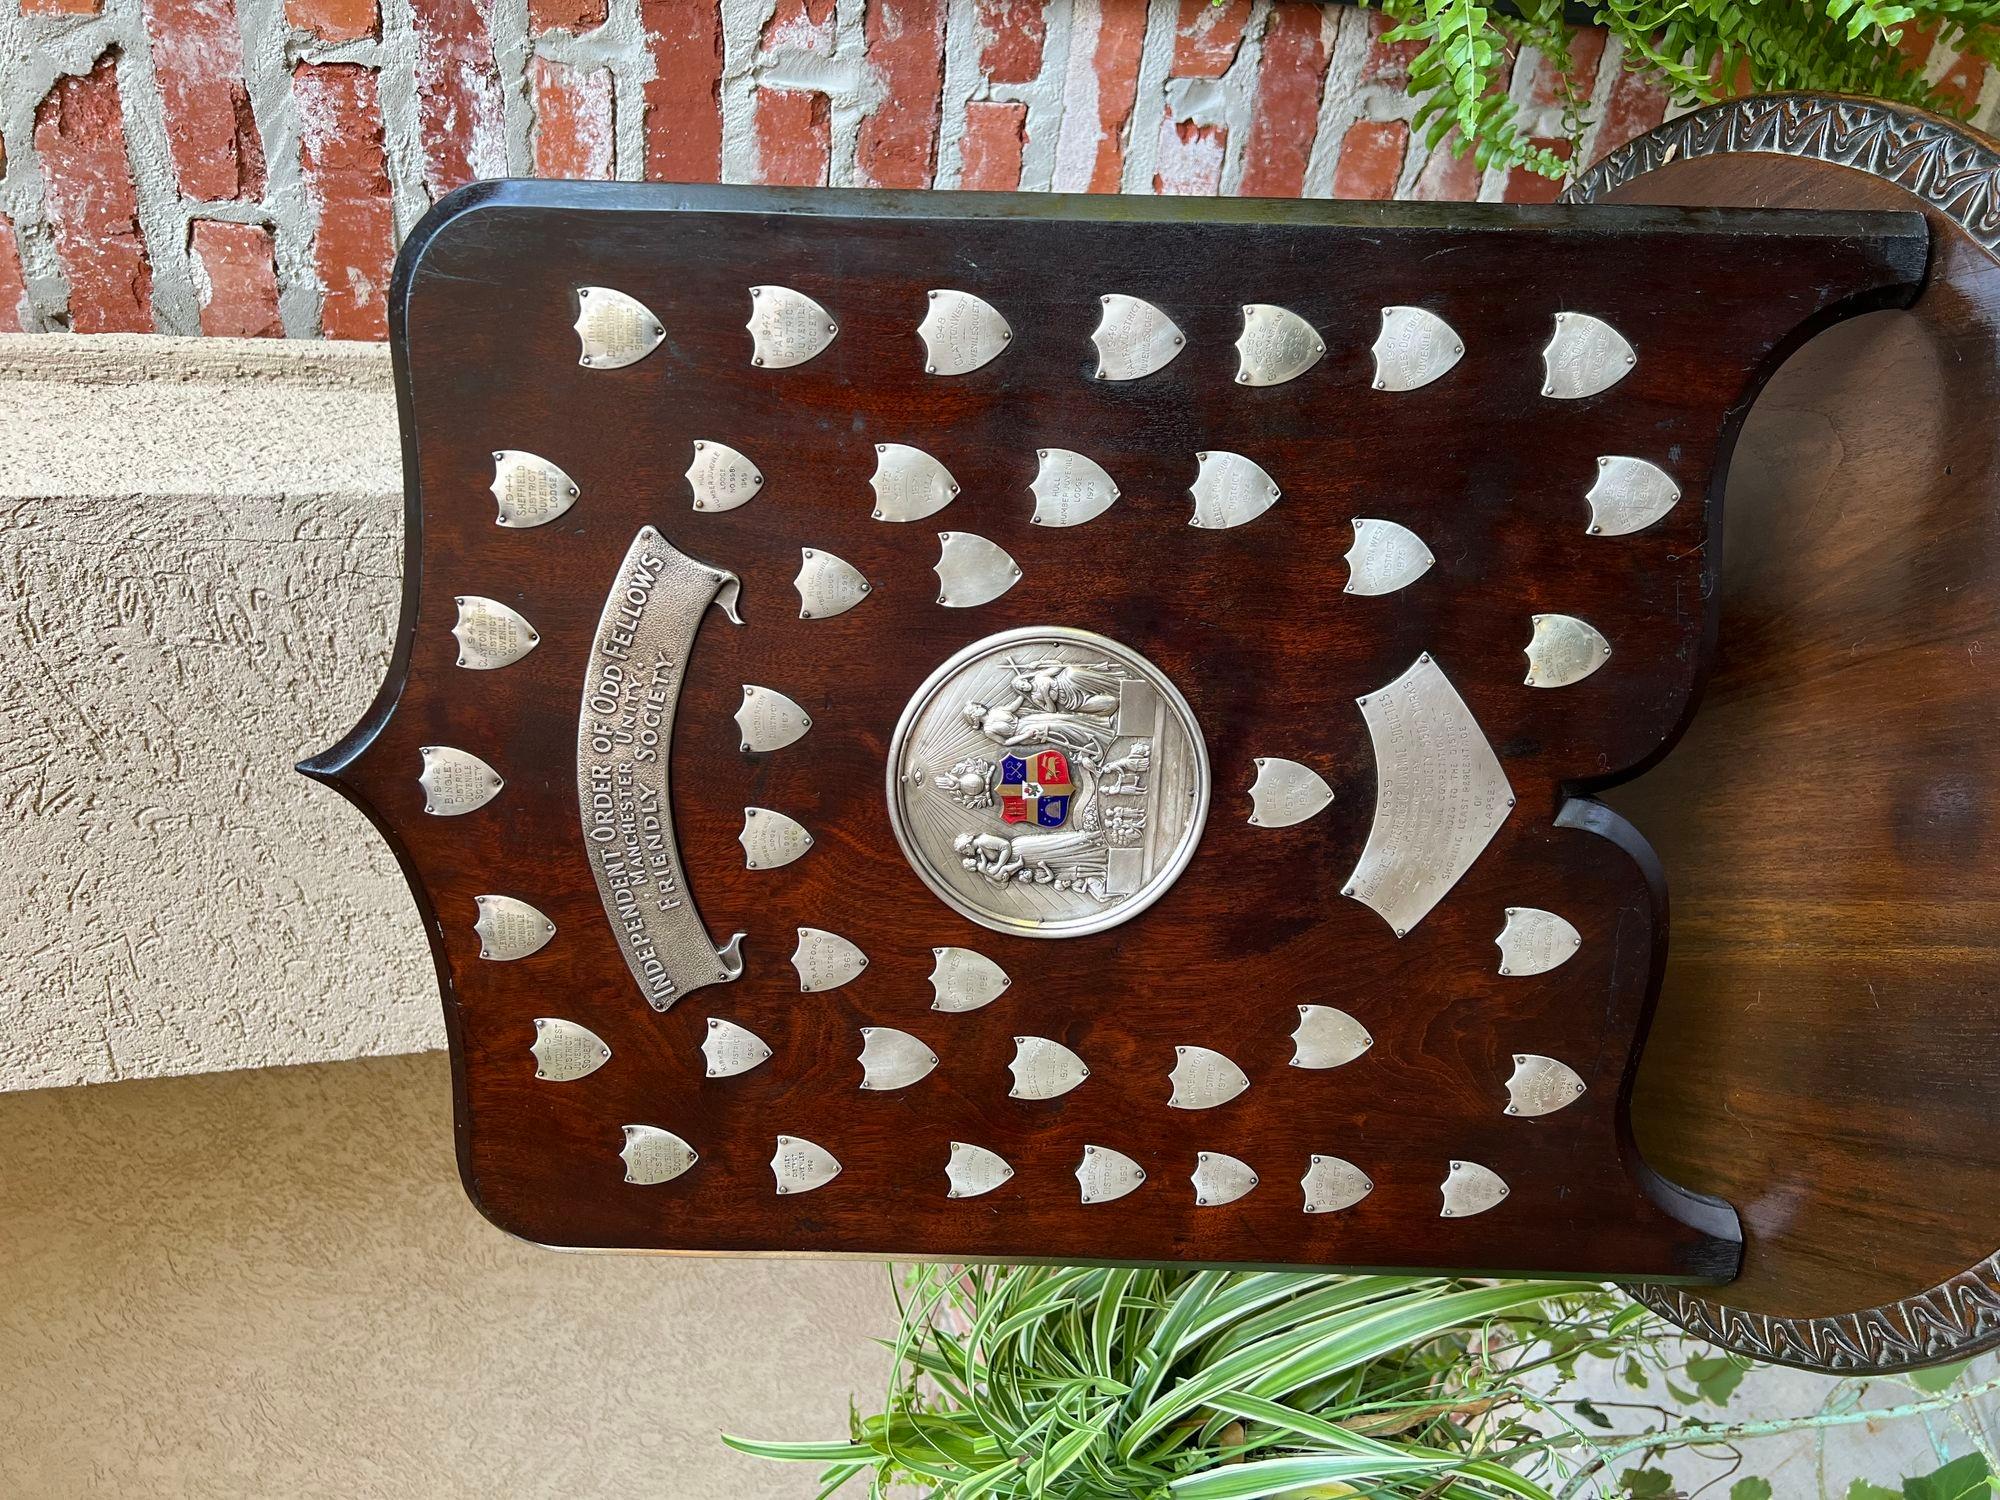 Antique English Order of the Odd Fellows Society Trophy Award c1939 Silver plate.

Direct from England, just arrived in our most recent container, we have several of these one-of-a-kind English trophies that are brimming with provenance, and oh “the